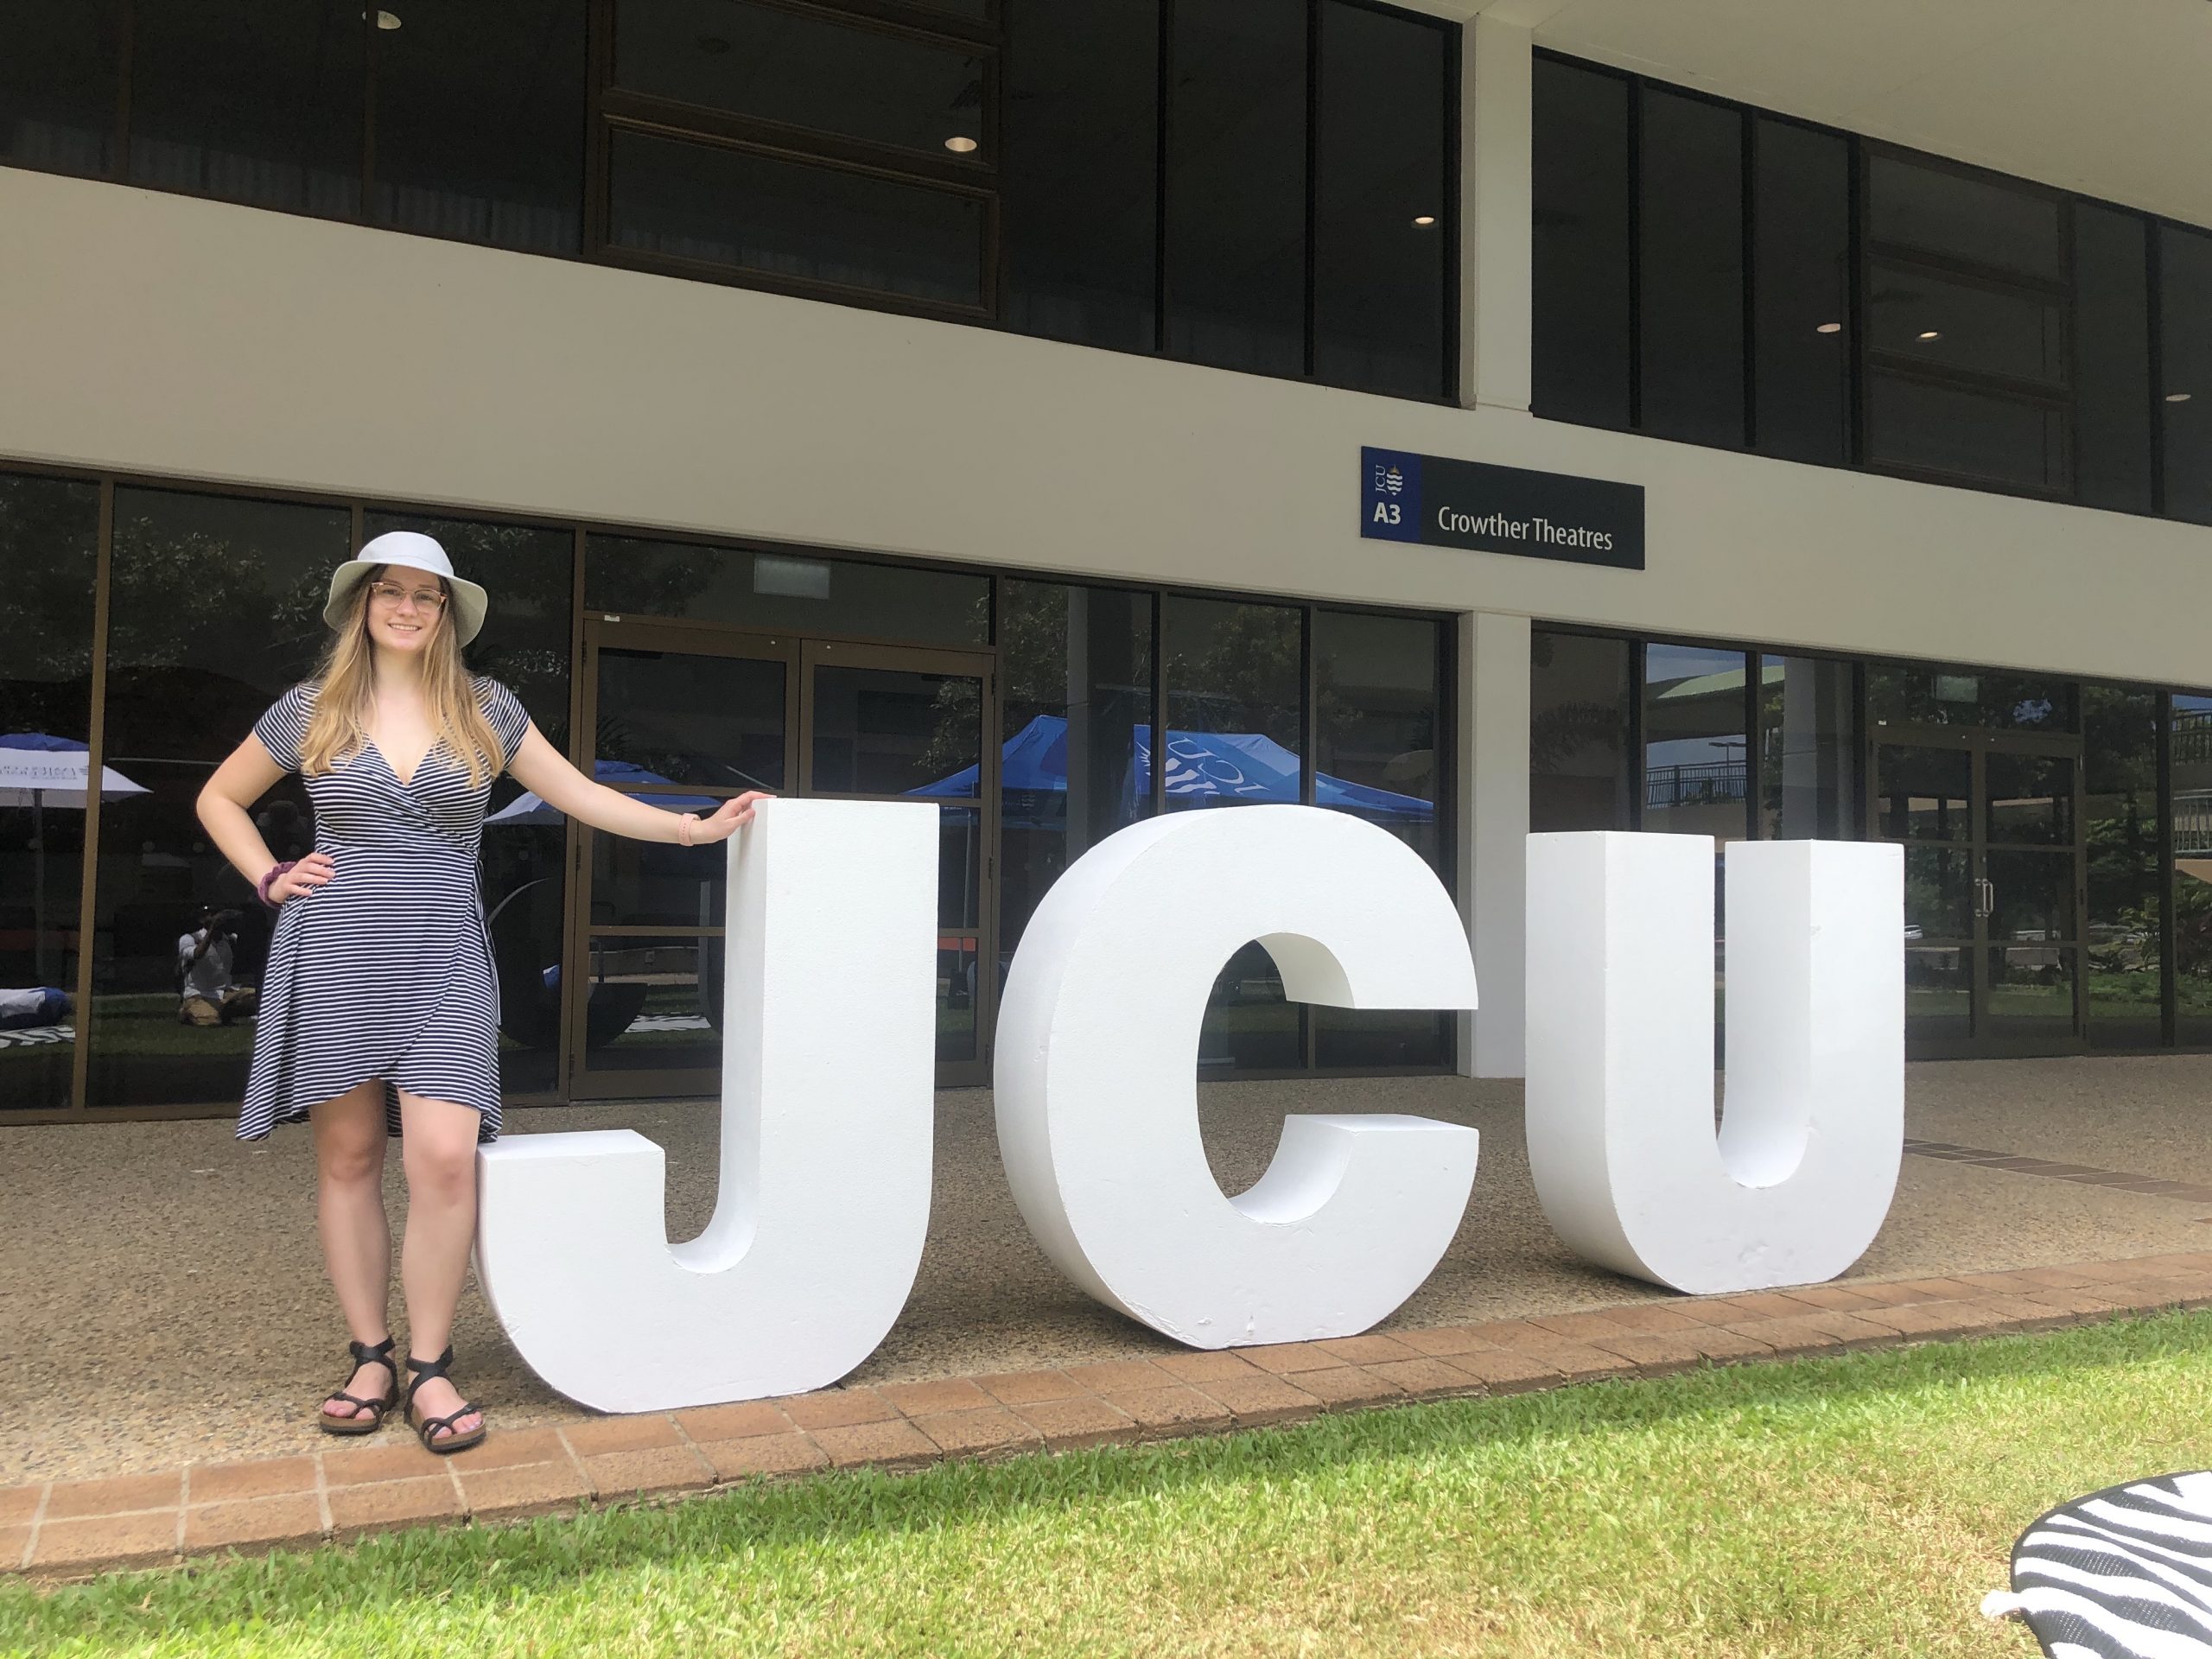 Christina standing next to the letters "j" "c" and "u"